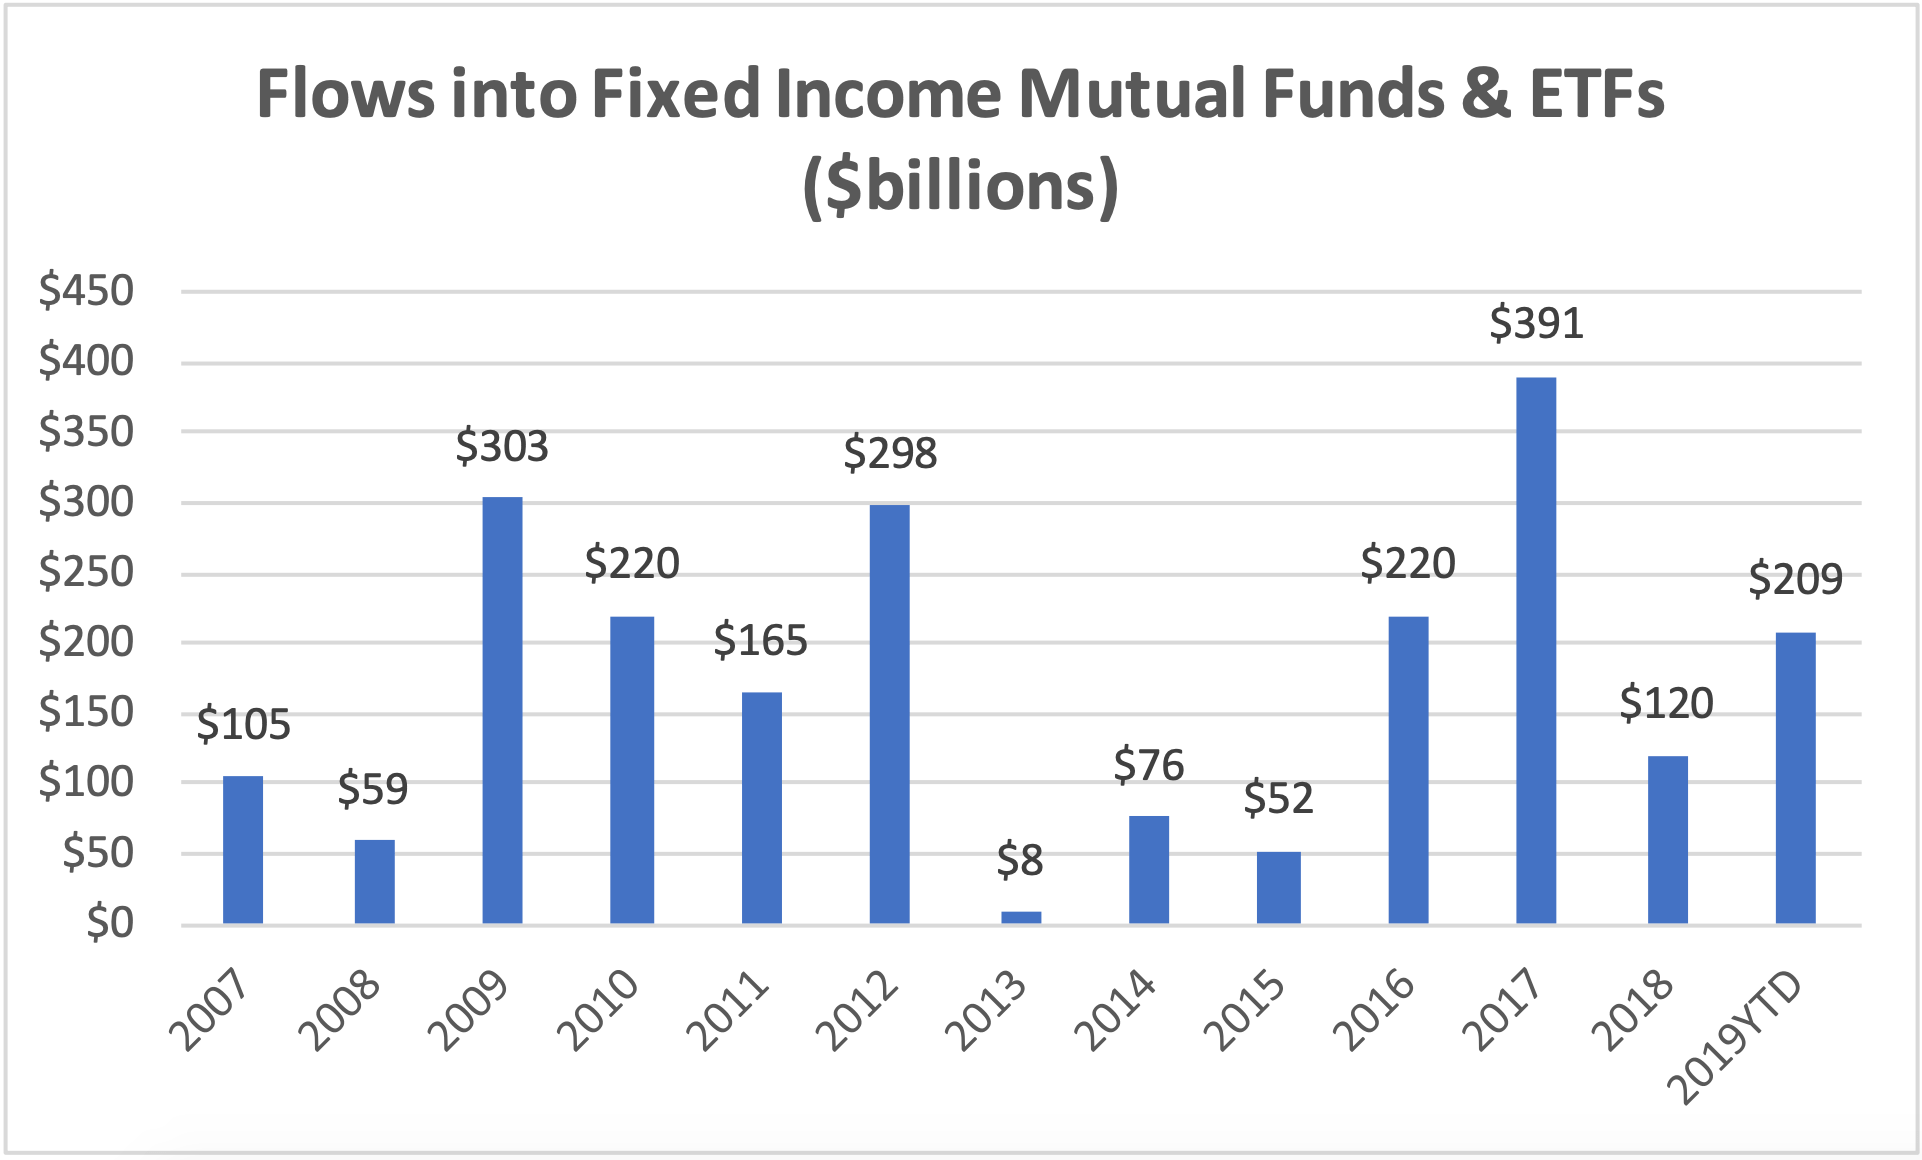 Flows into Fixed Income Mutual Funds & ETFs ($billions)